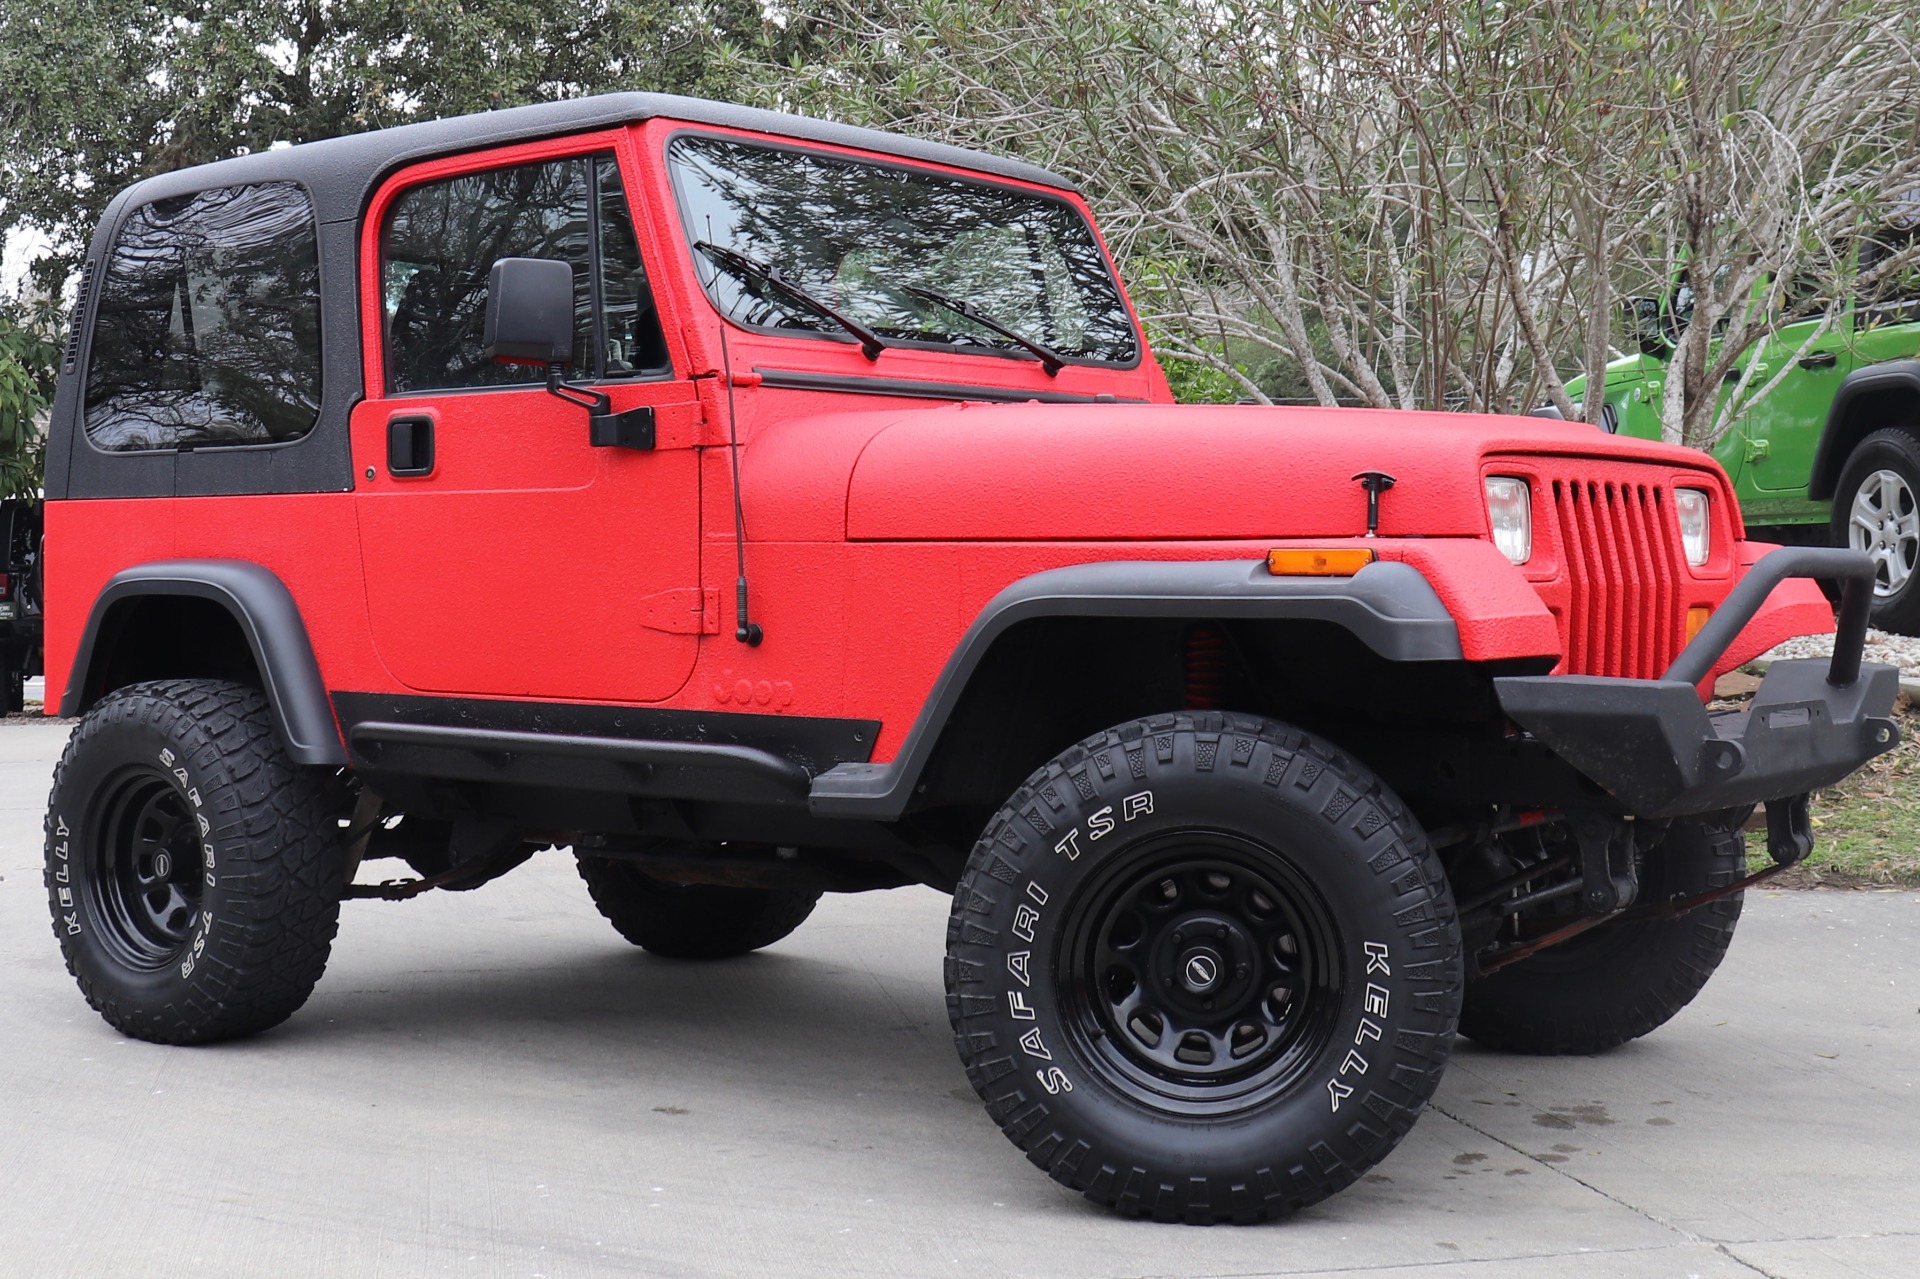 Used 1995 Jeep Wrangler S For Sale ($7,995) | Select Jeeps Inc. Stock  #317260